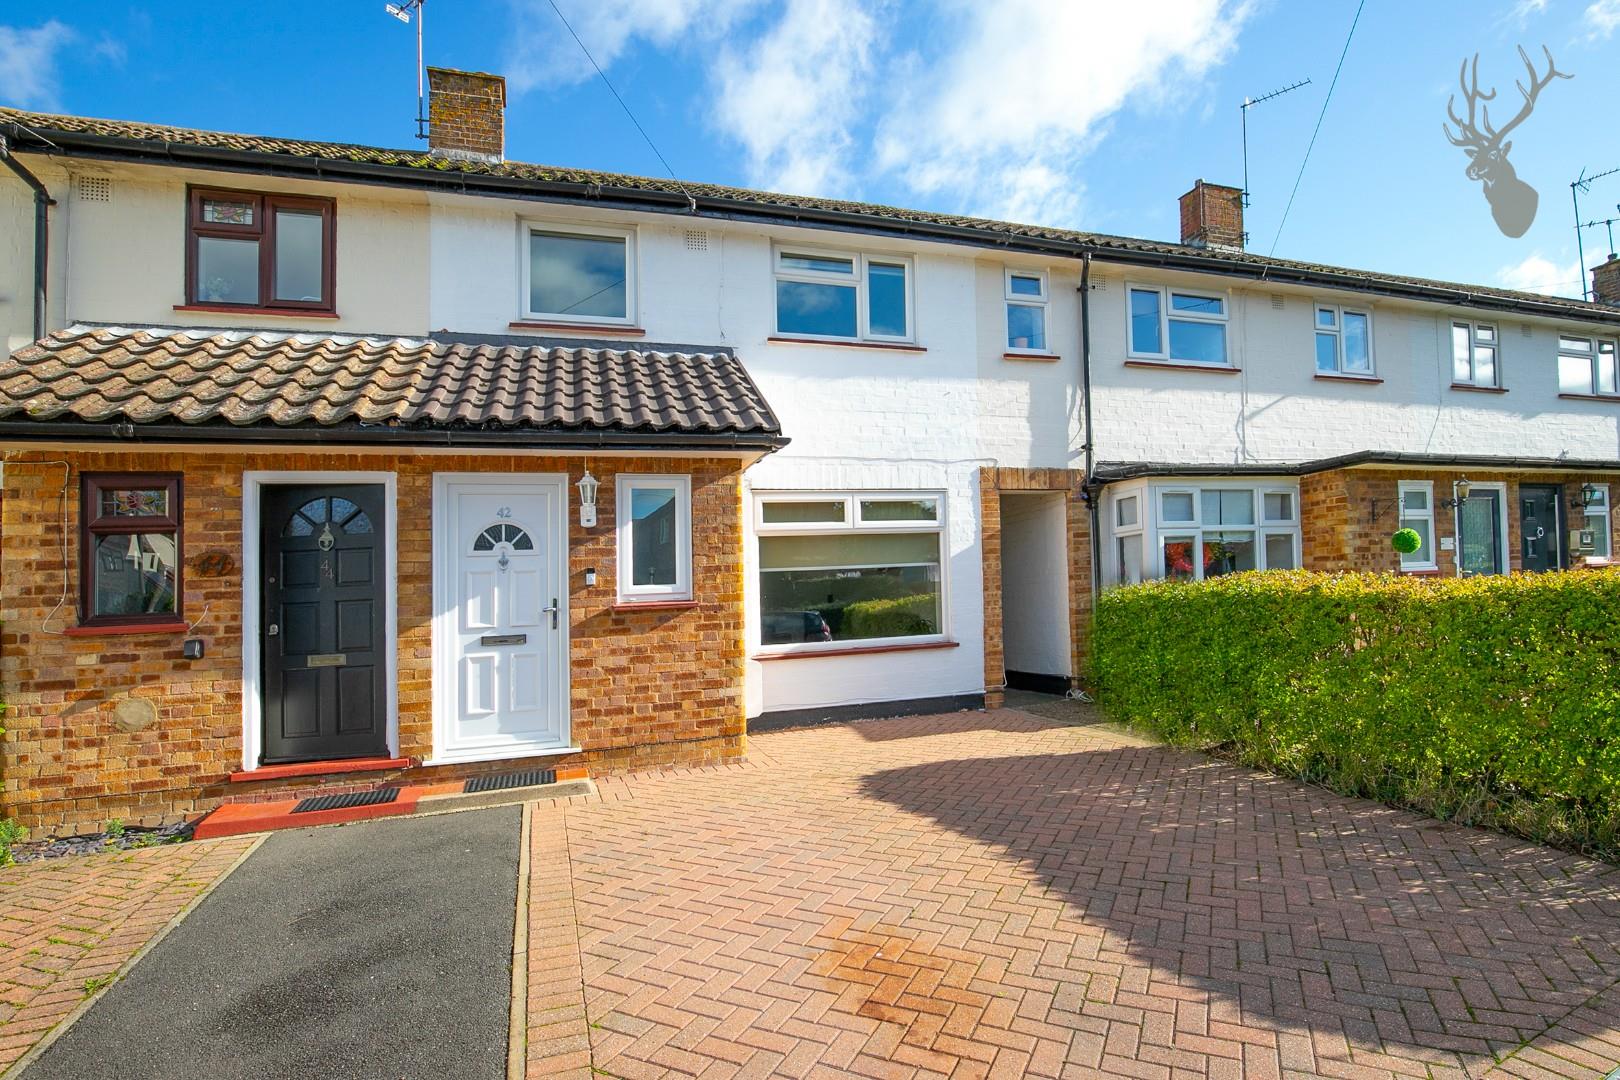 Similar Property: House - Mid Terrace in Theydon Bois